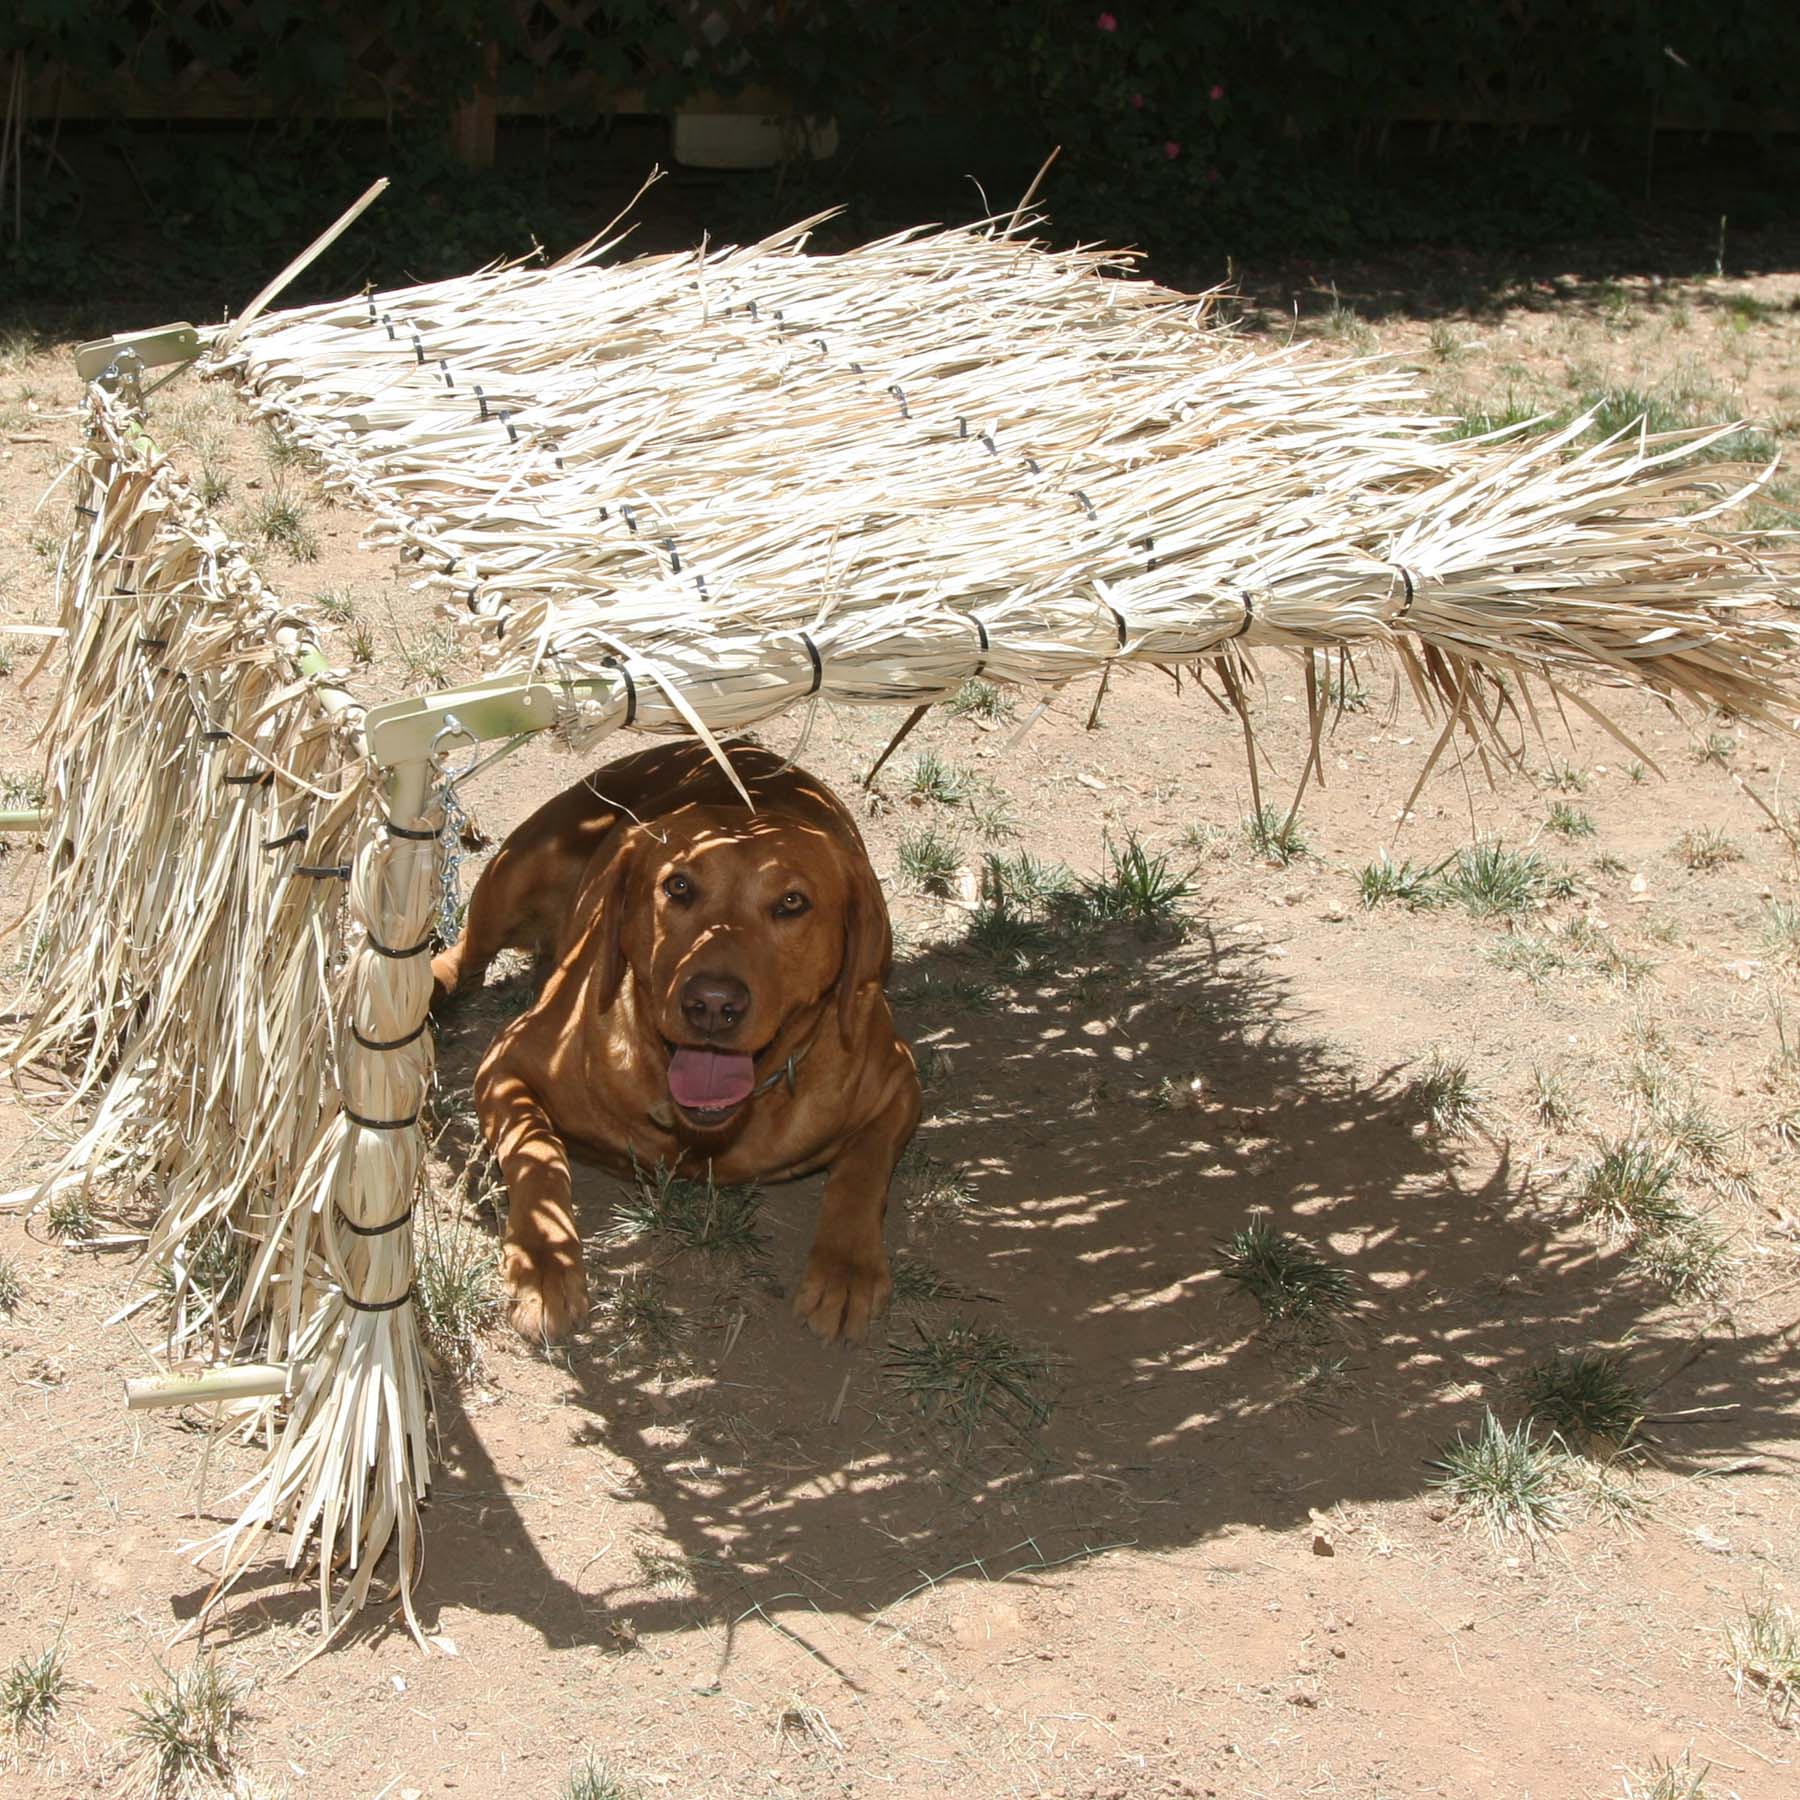 Dog Blind with Gibby Grass®